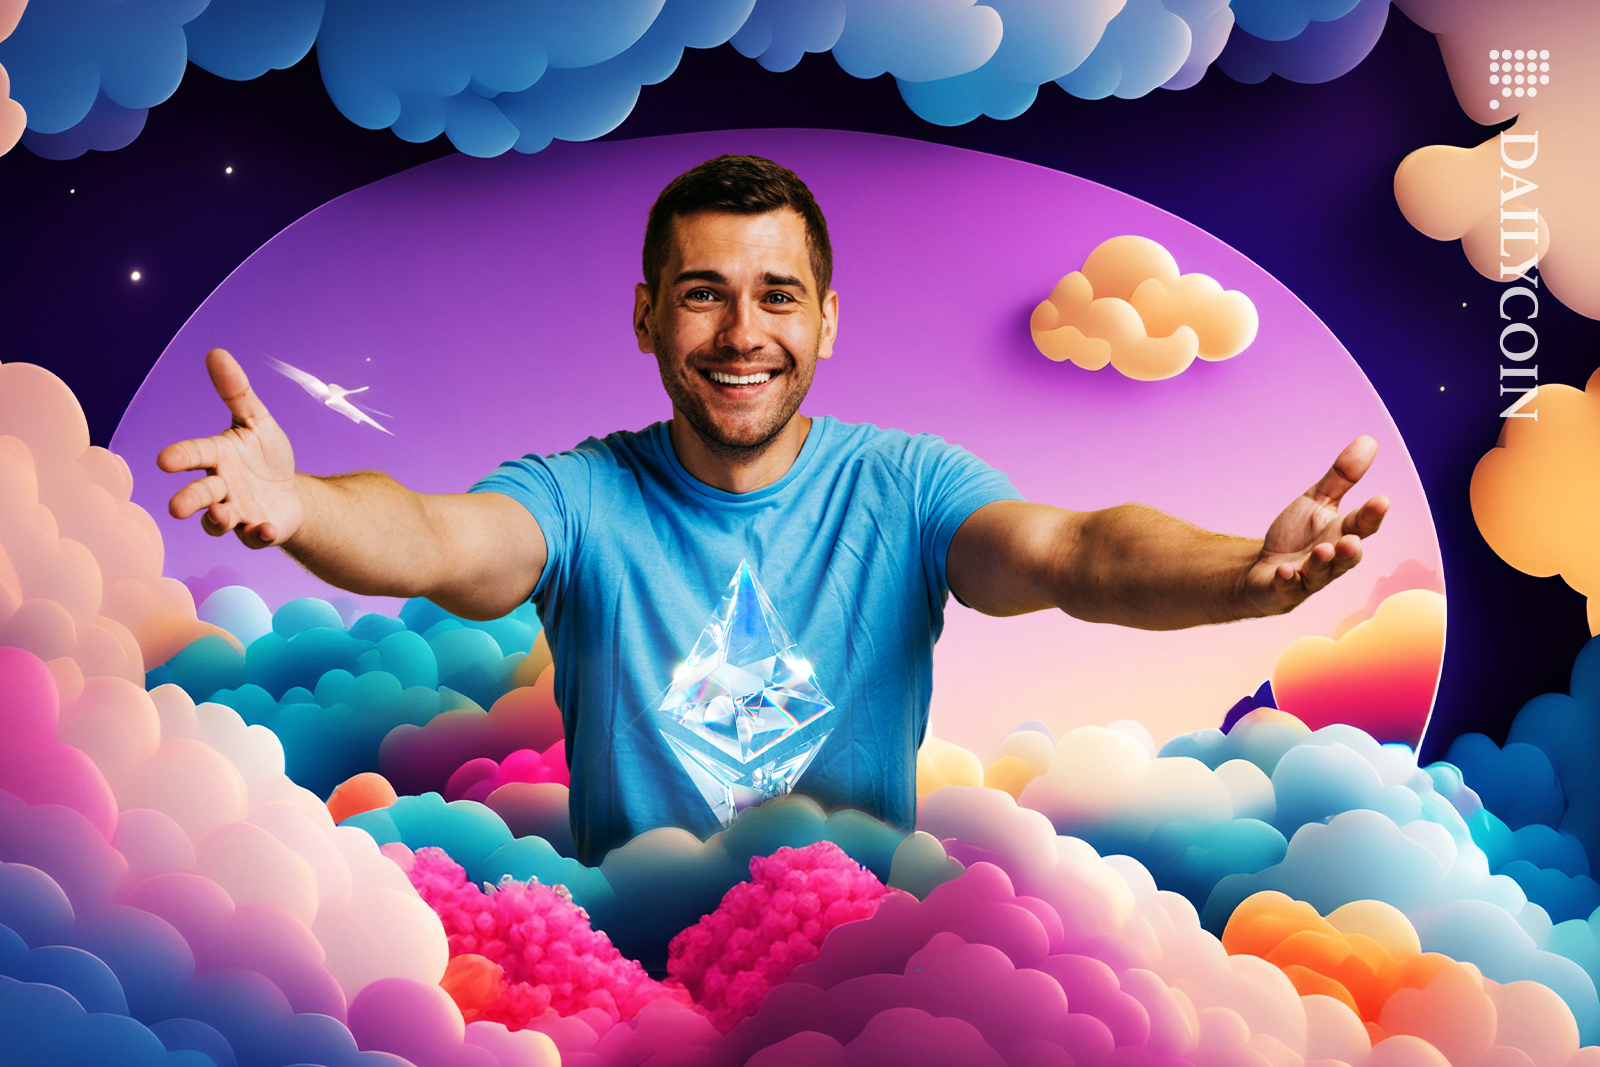 Happy man in the clouds is welcoming with his arms wide open and Ethereum gem logo on his t-shirt.